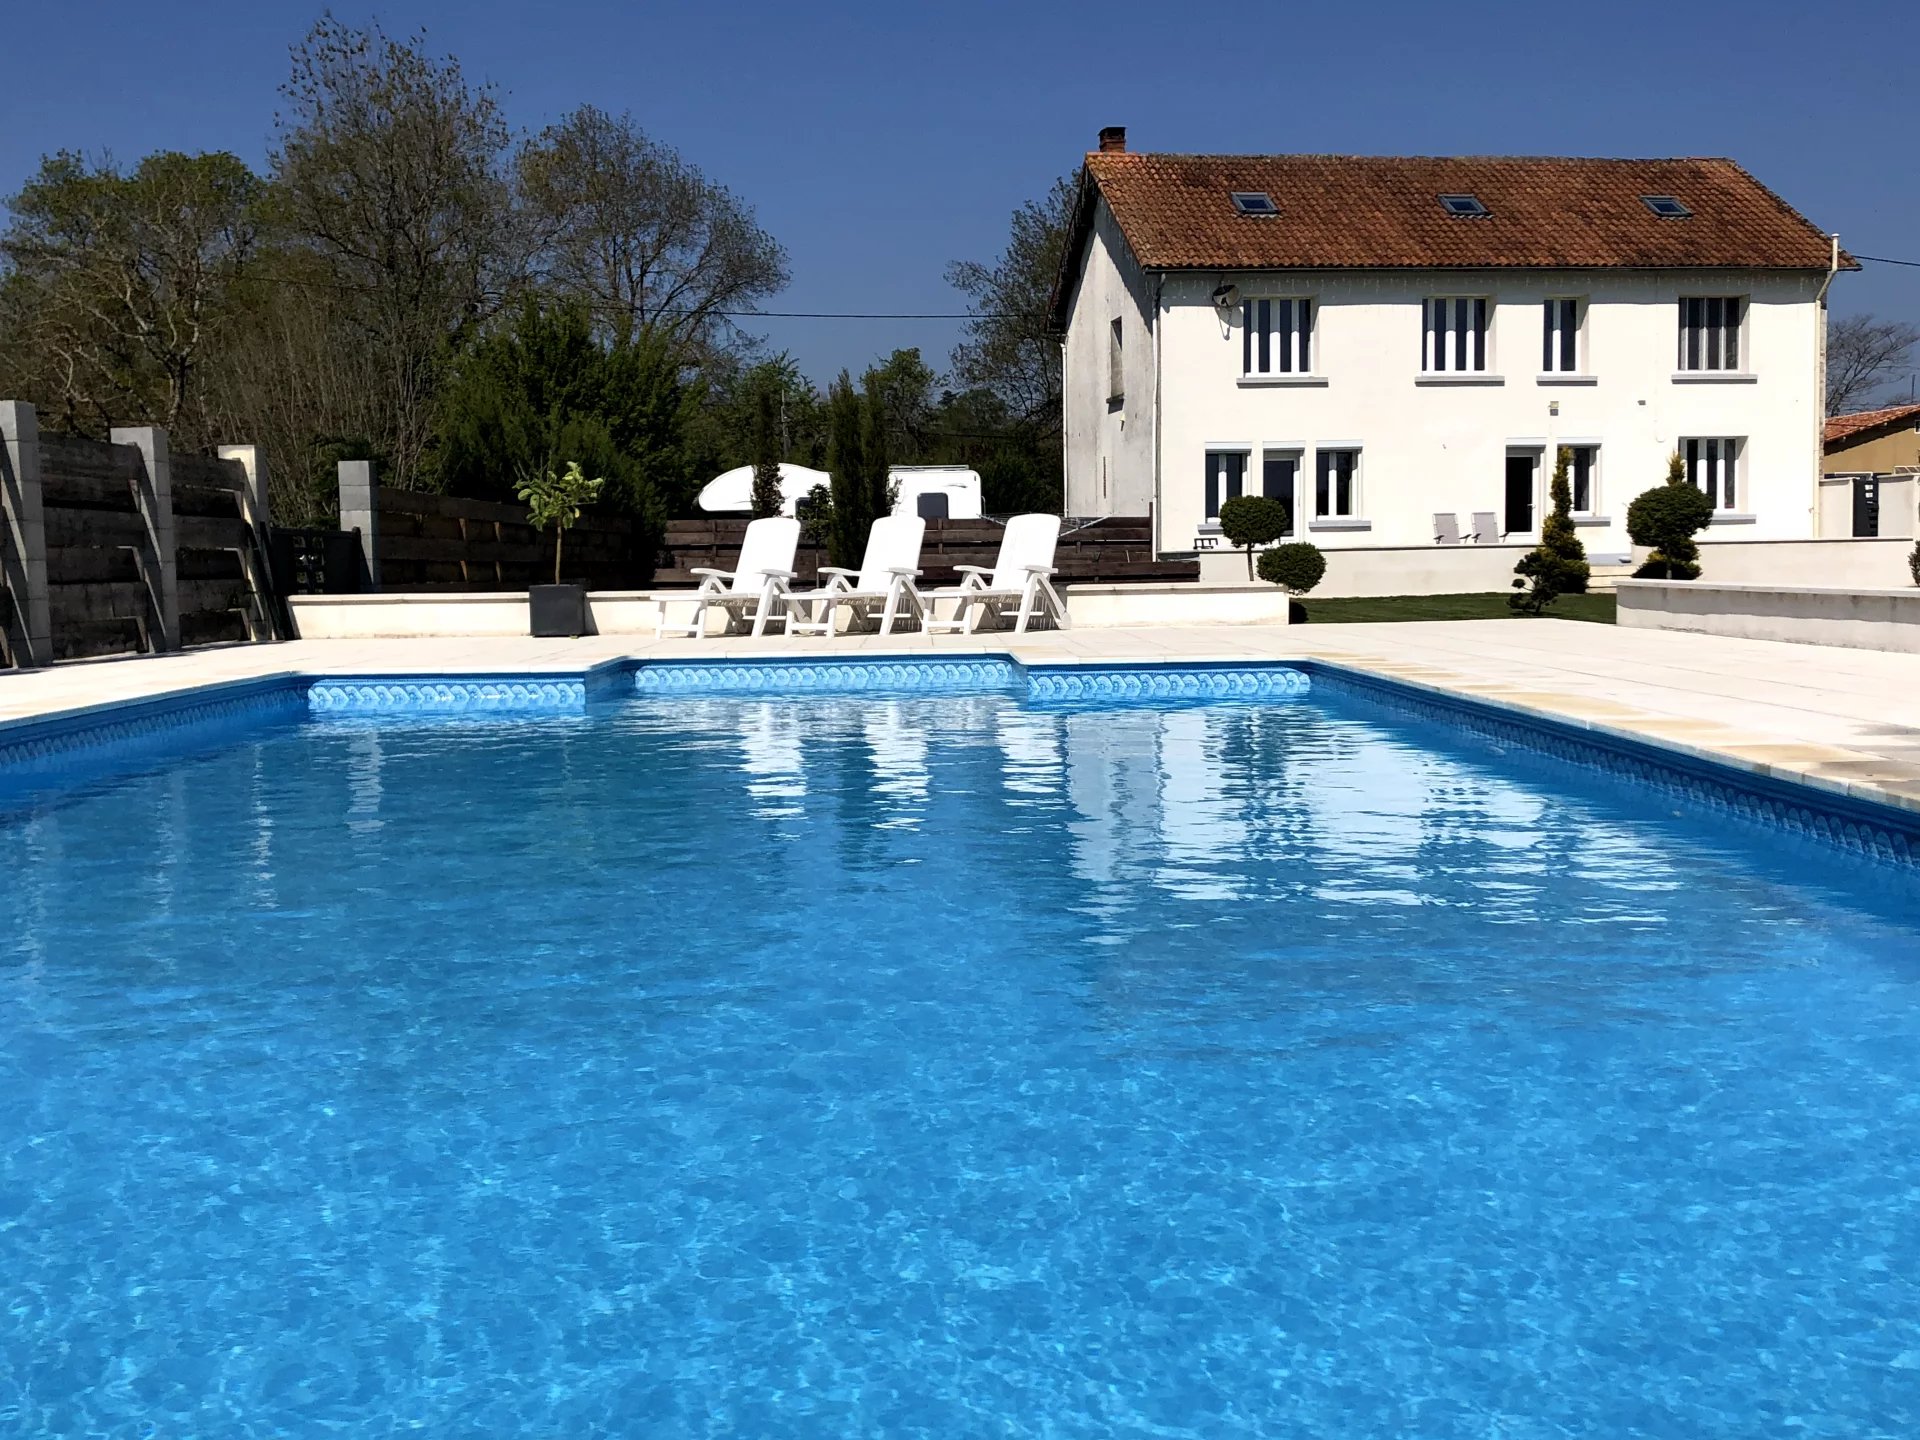 Amazing 6 bed renovated home, stunning large heated swimming pool, outbuilding, river frontage and land